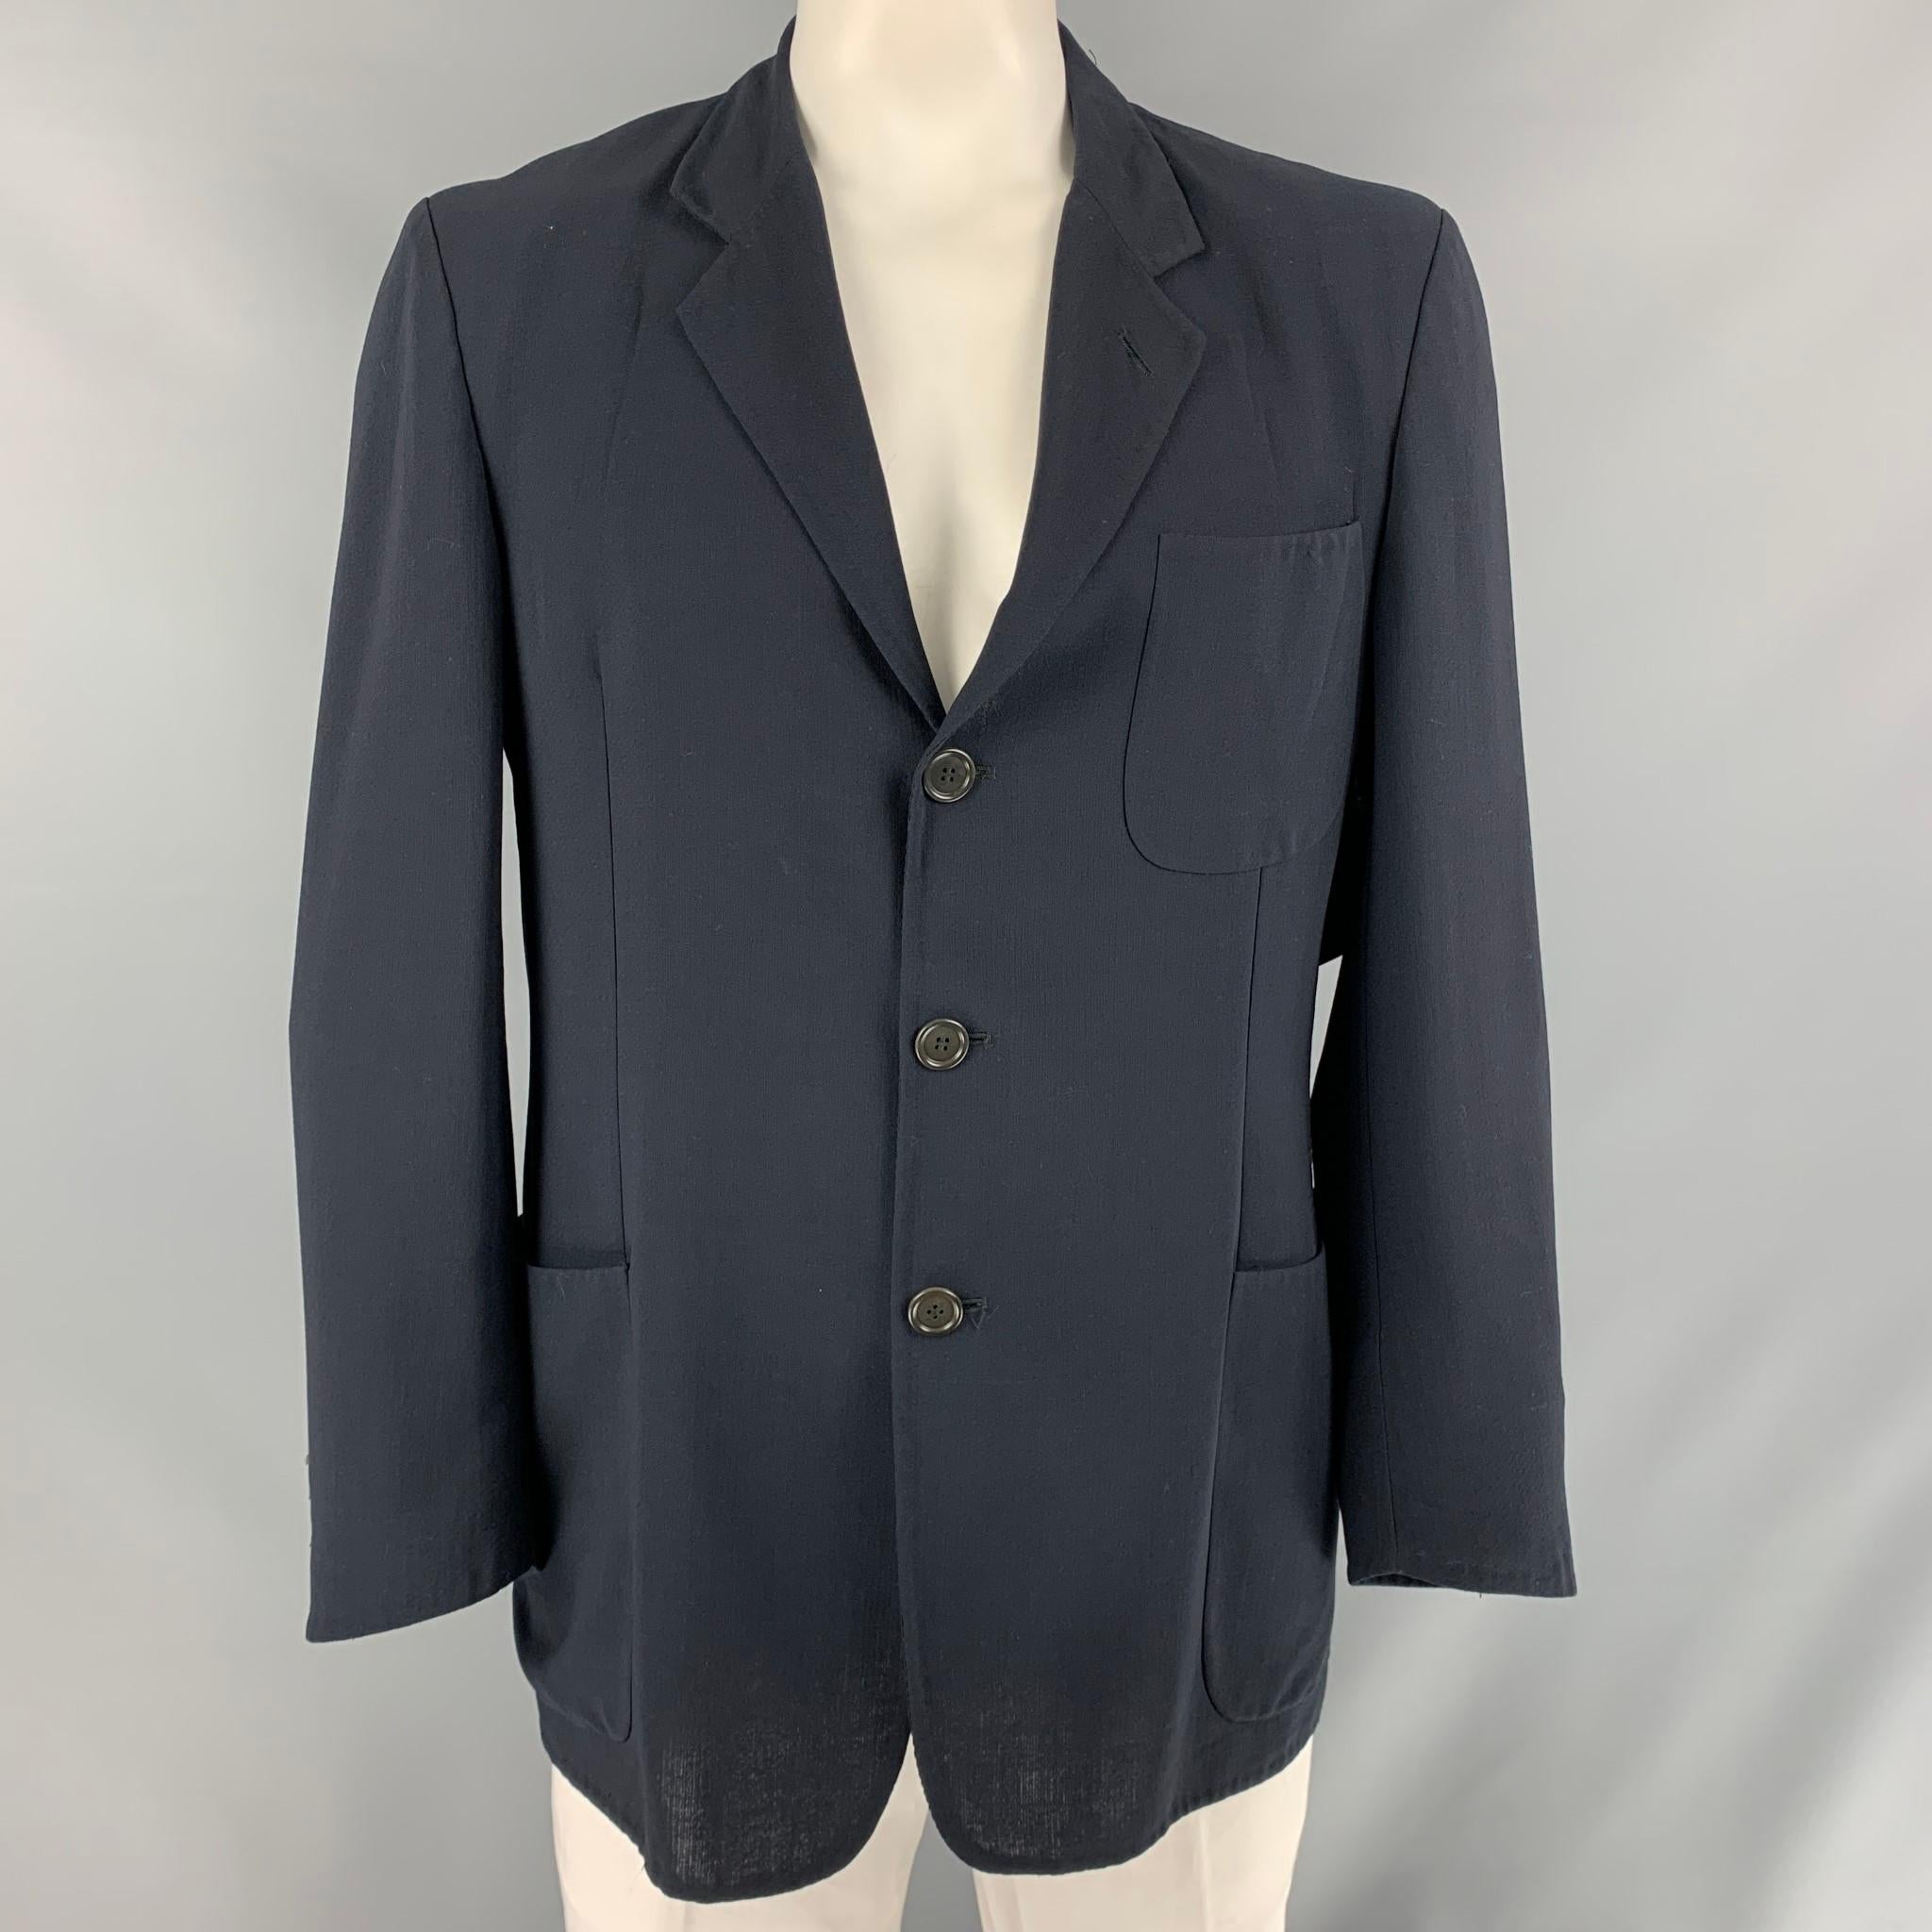 ERMENEGILDO ZEGNA soft sport coat comes in navy solid fabric, unlined featuring a notch lapel, patch pockets, and a three button closure.

Excellent Pre-Owned Condition. Fabric Tag Removed.
Marked: No size Marked.

Measurements:

Shoulder: 19